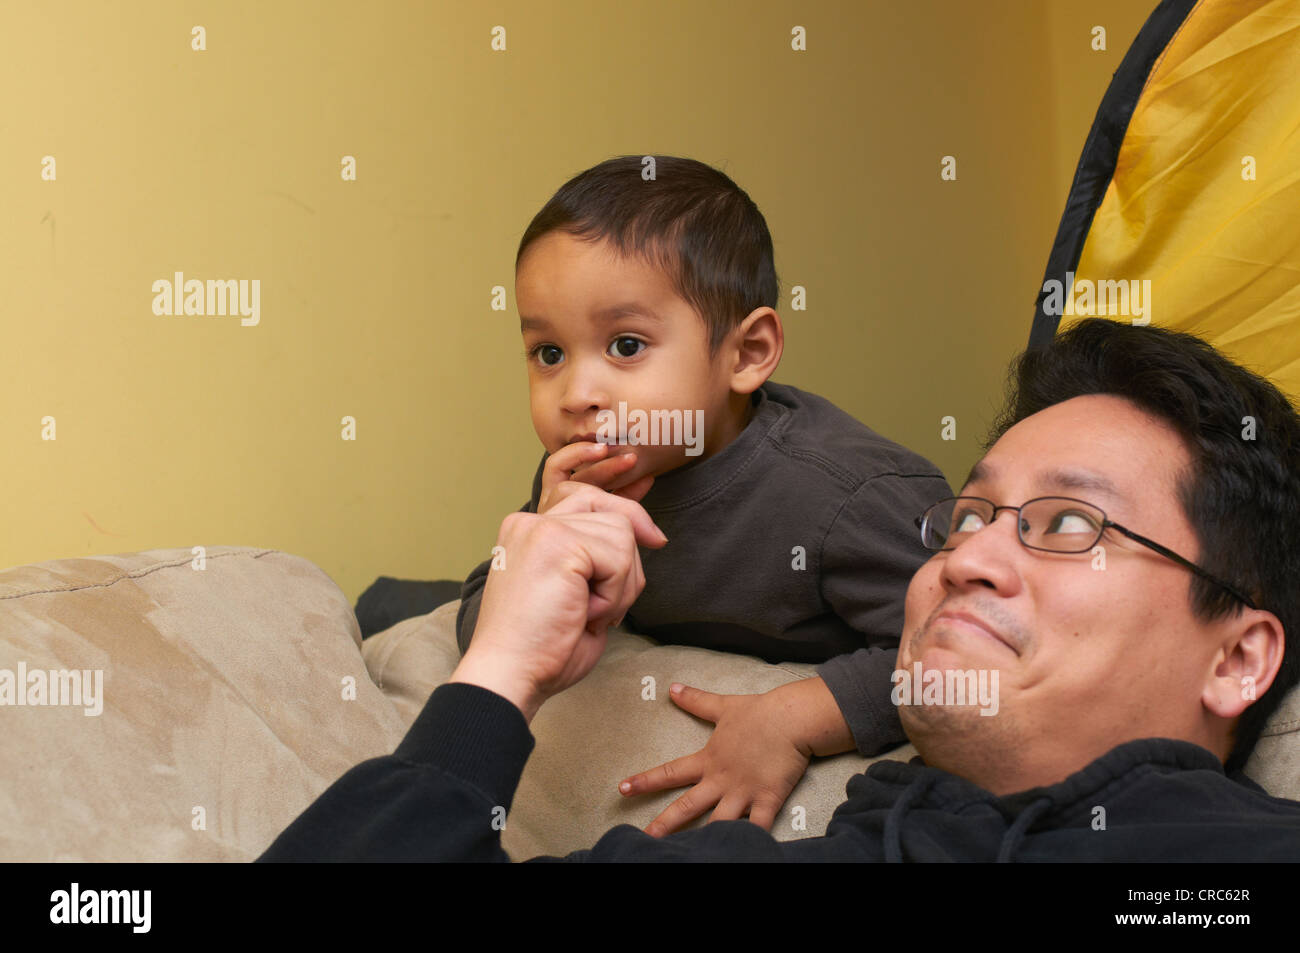 Father and son playing on sofa Stock Photo